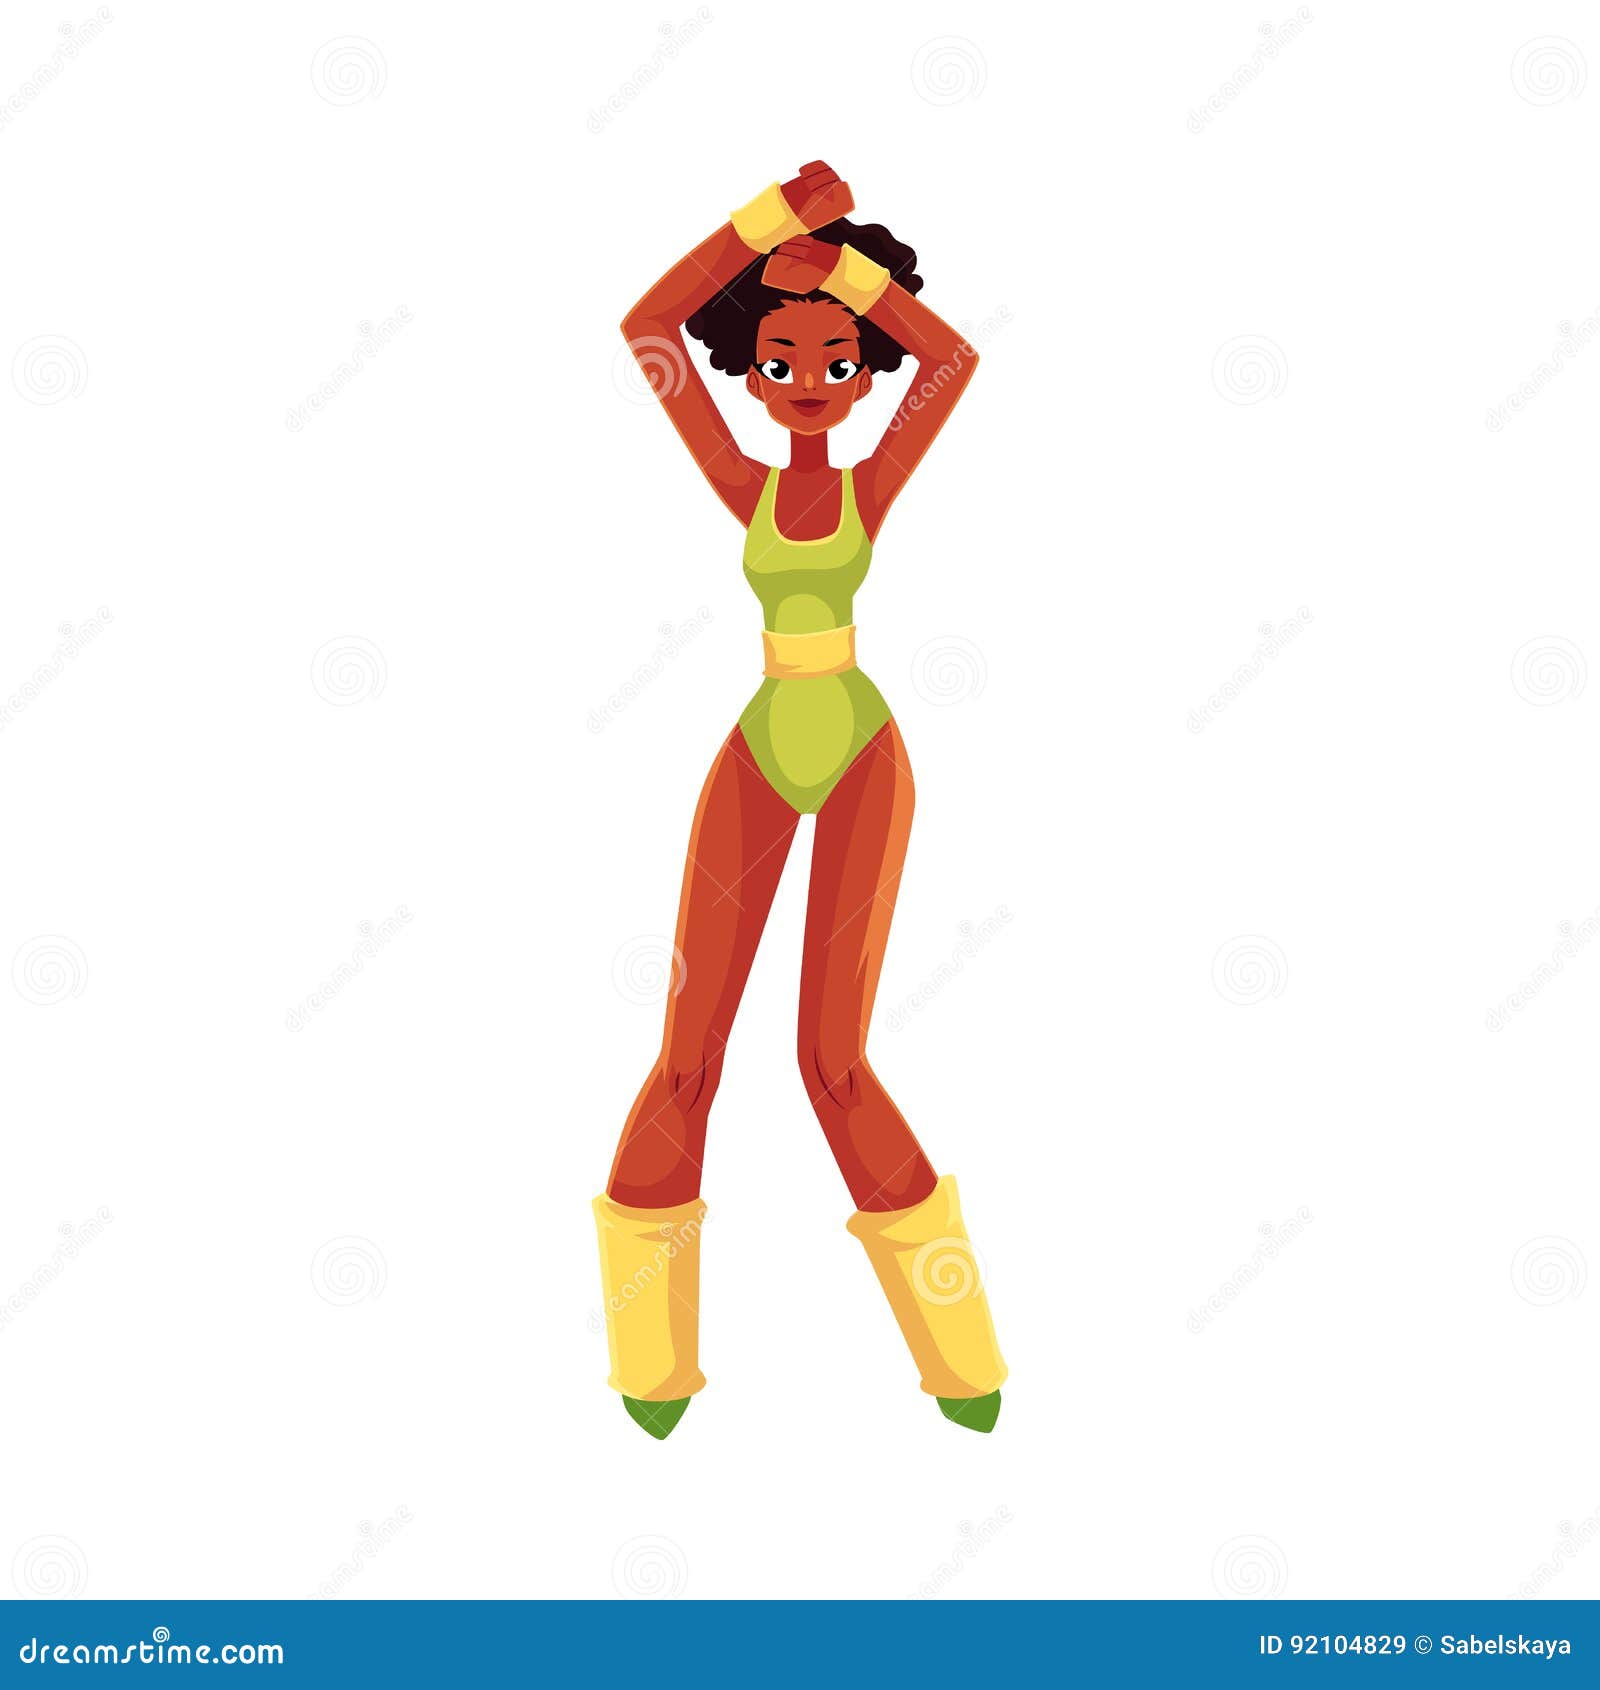 https://thumbs.dreamstime.com/z/black-african-girl-woman-s-style-outfit-aerobics-workout-american-enjoying-sport-dance-cartoon-vector-illustration-isolated-92104829.jpg